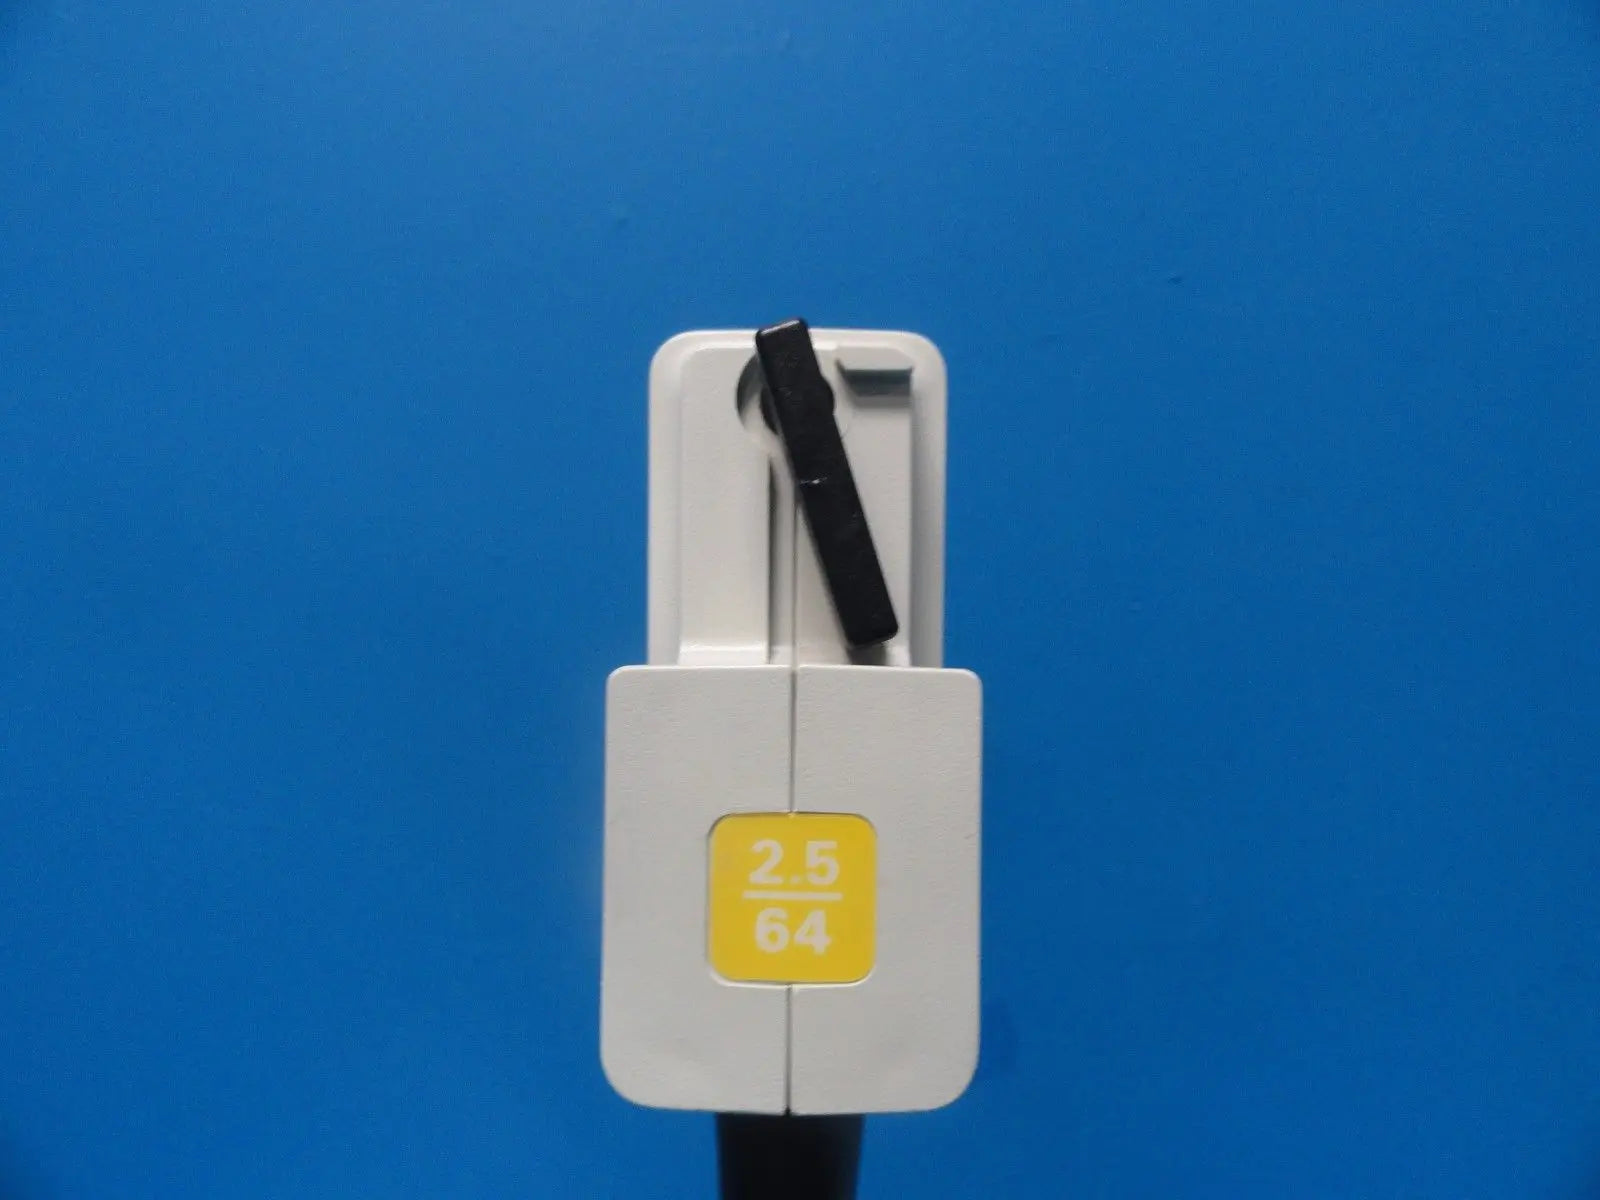 GE 2.5 / 64 P/N 46-253669G1 Sector Array Ultrasound Transducer (10544) DIAGNOSTIC ULTRASOUND MACHINES FOR SALE